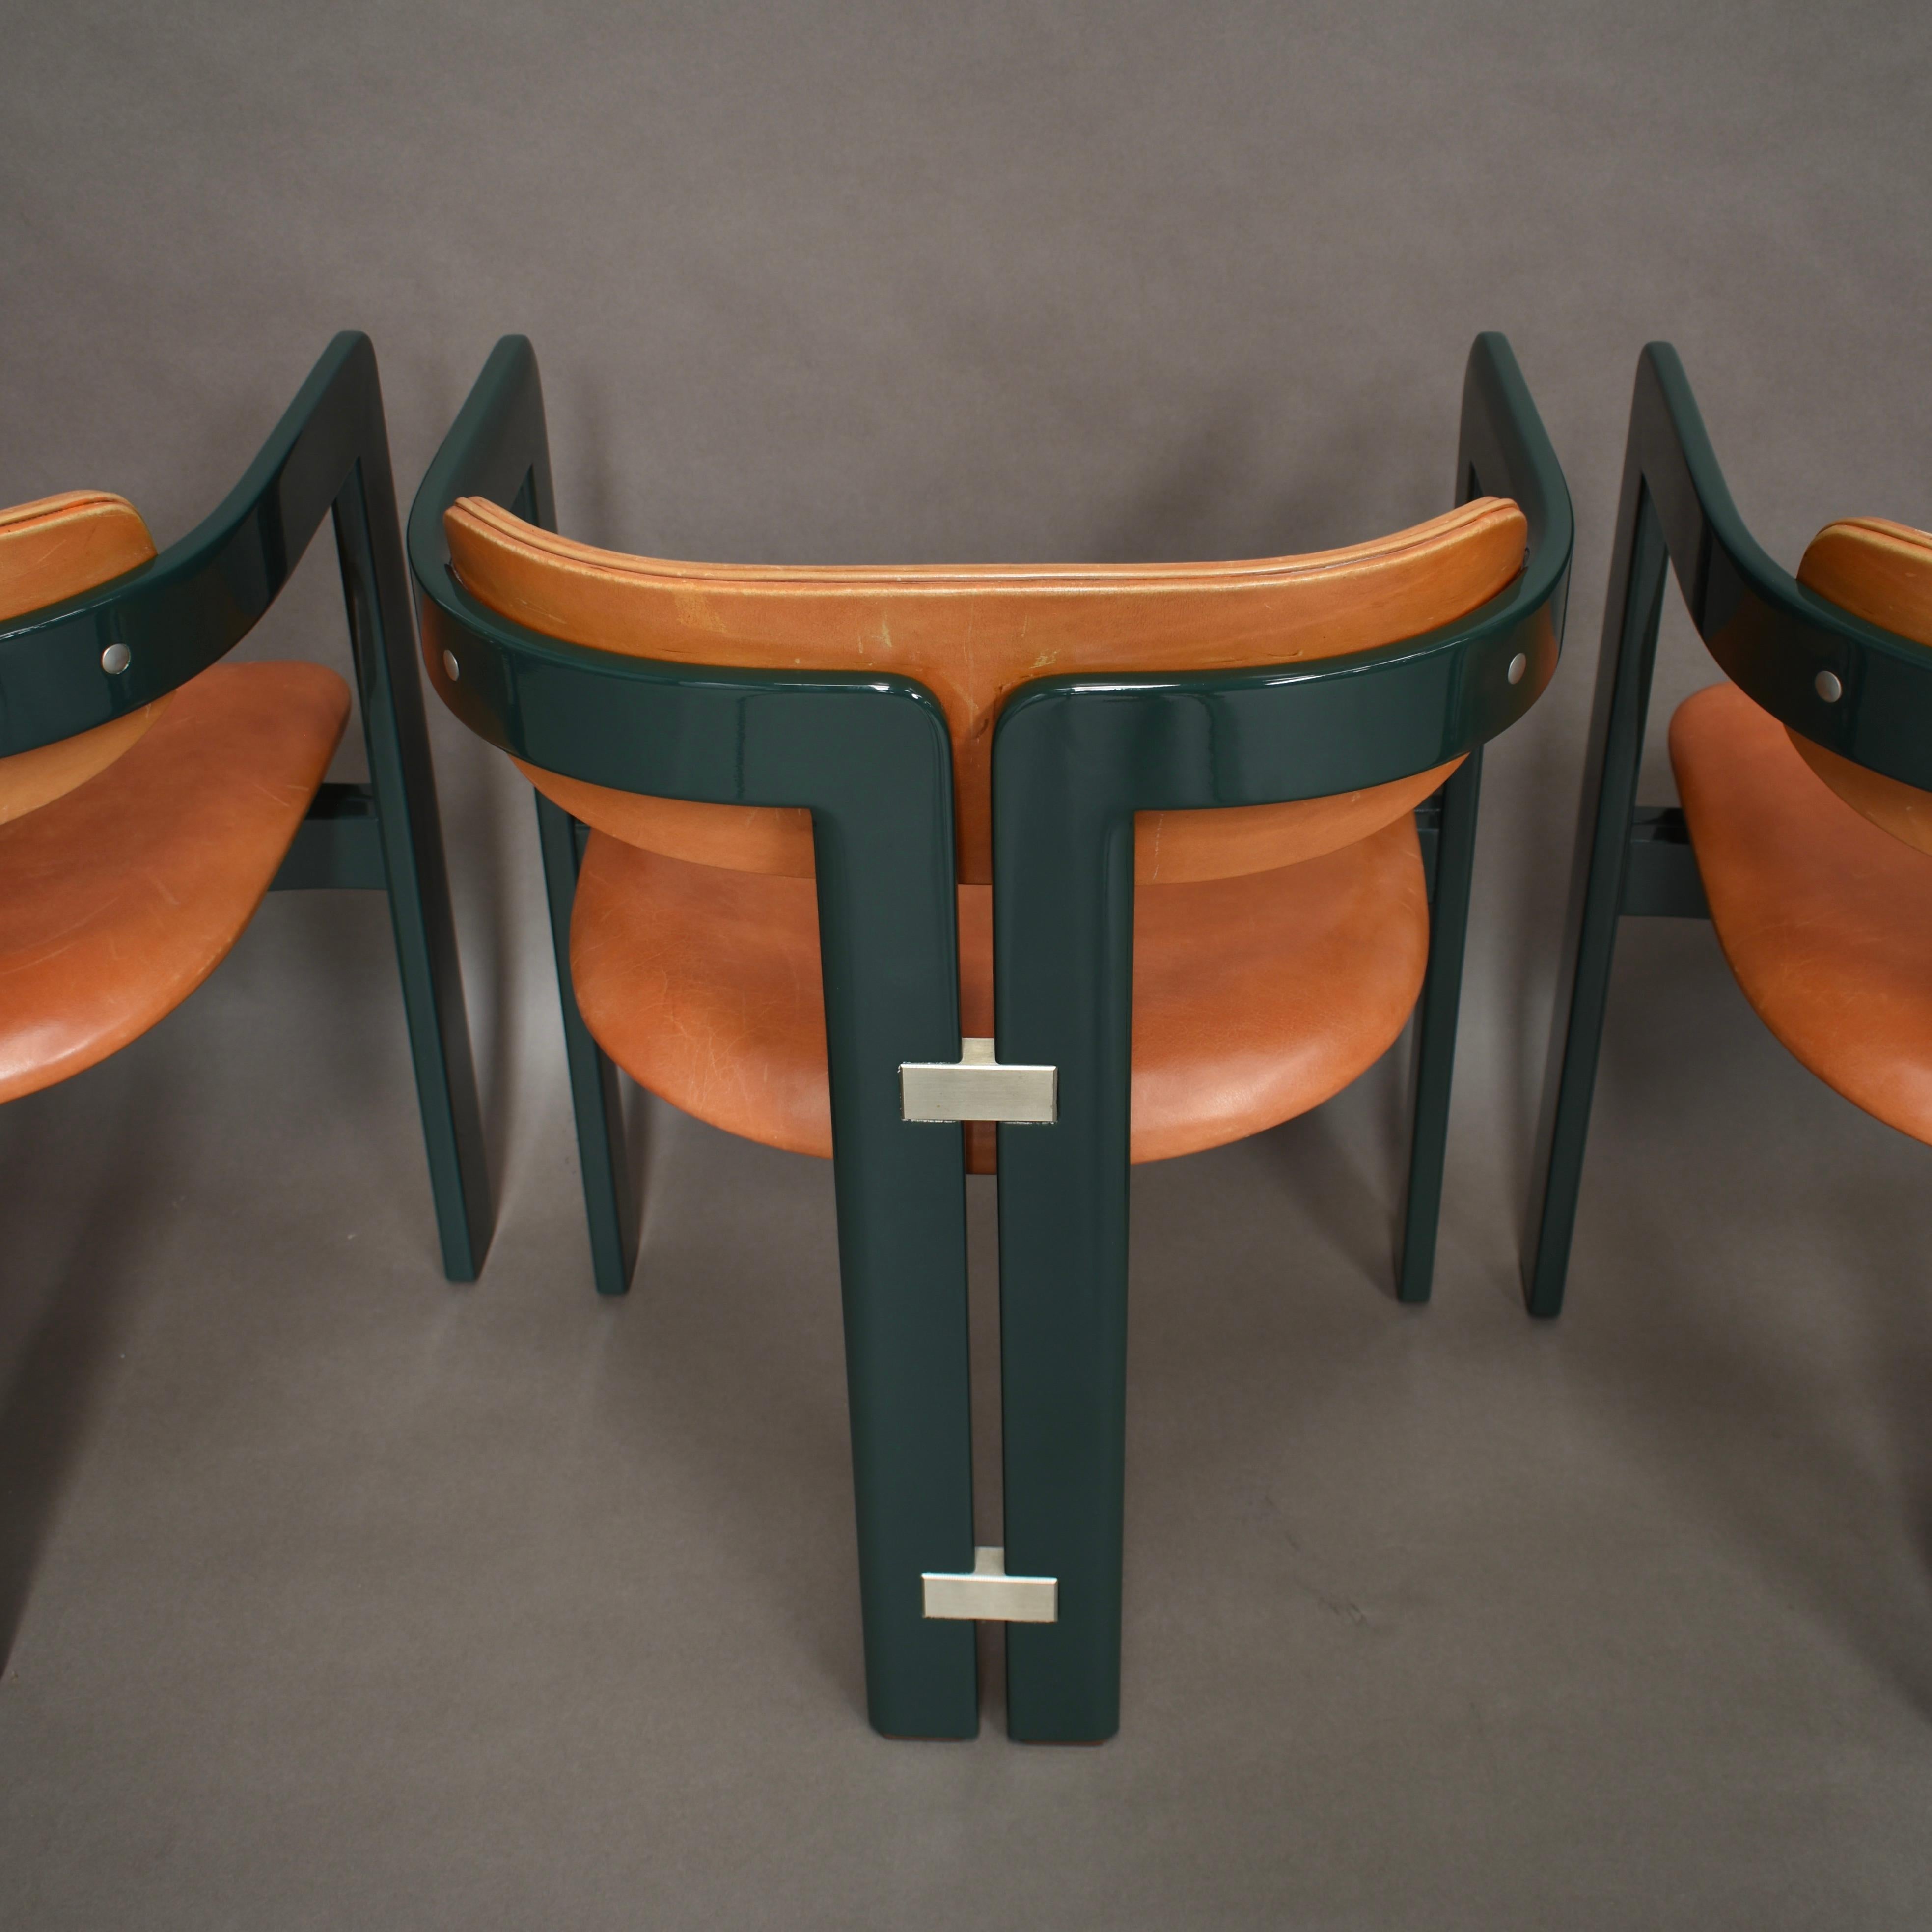 Pamplona Chairs by Augusti Savini in Green and Tan Leather, Italy, 1965 10